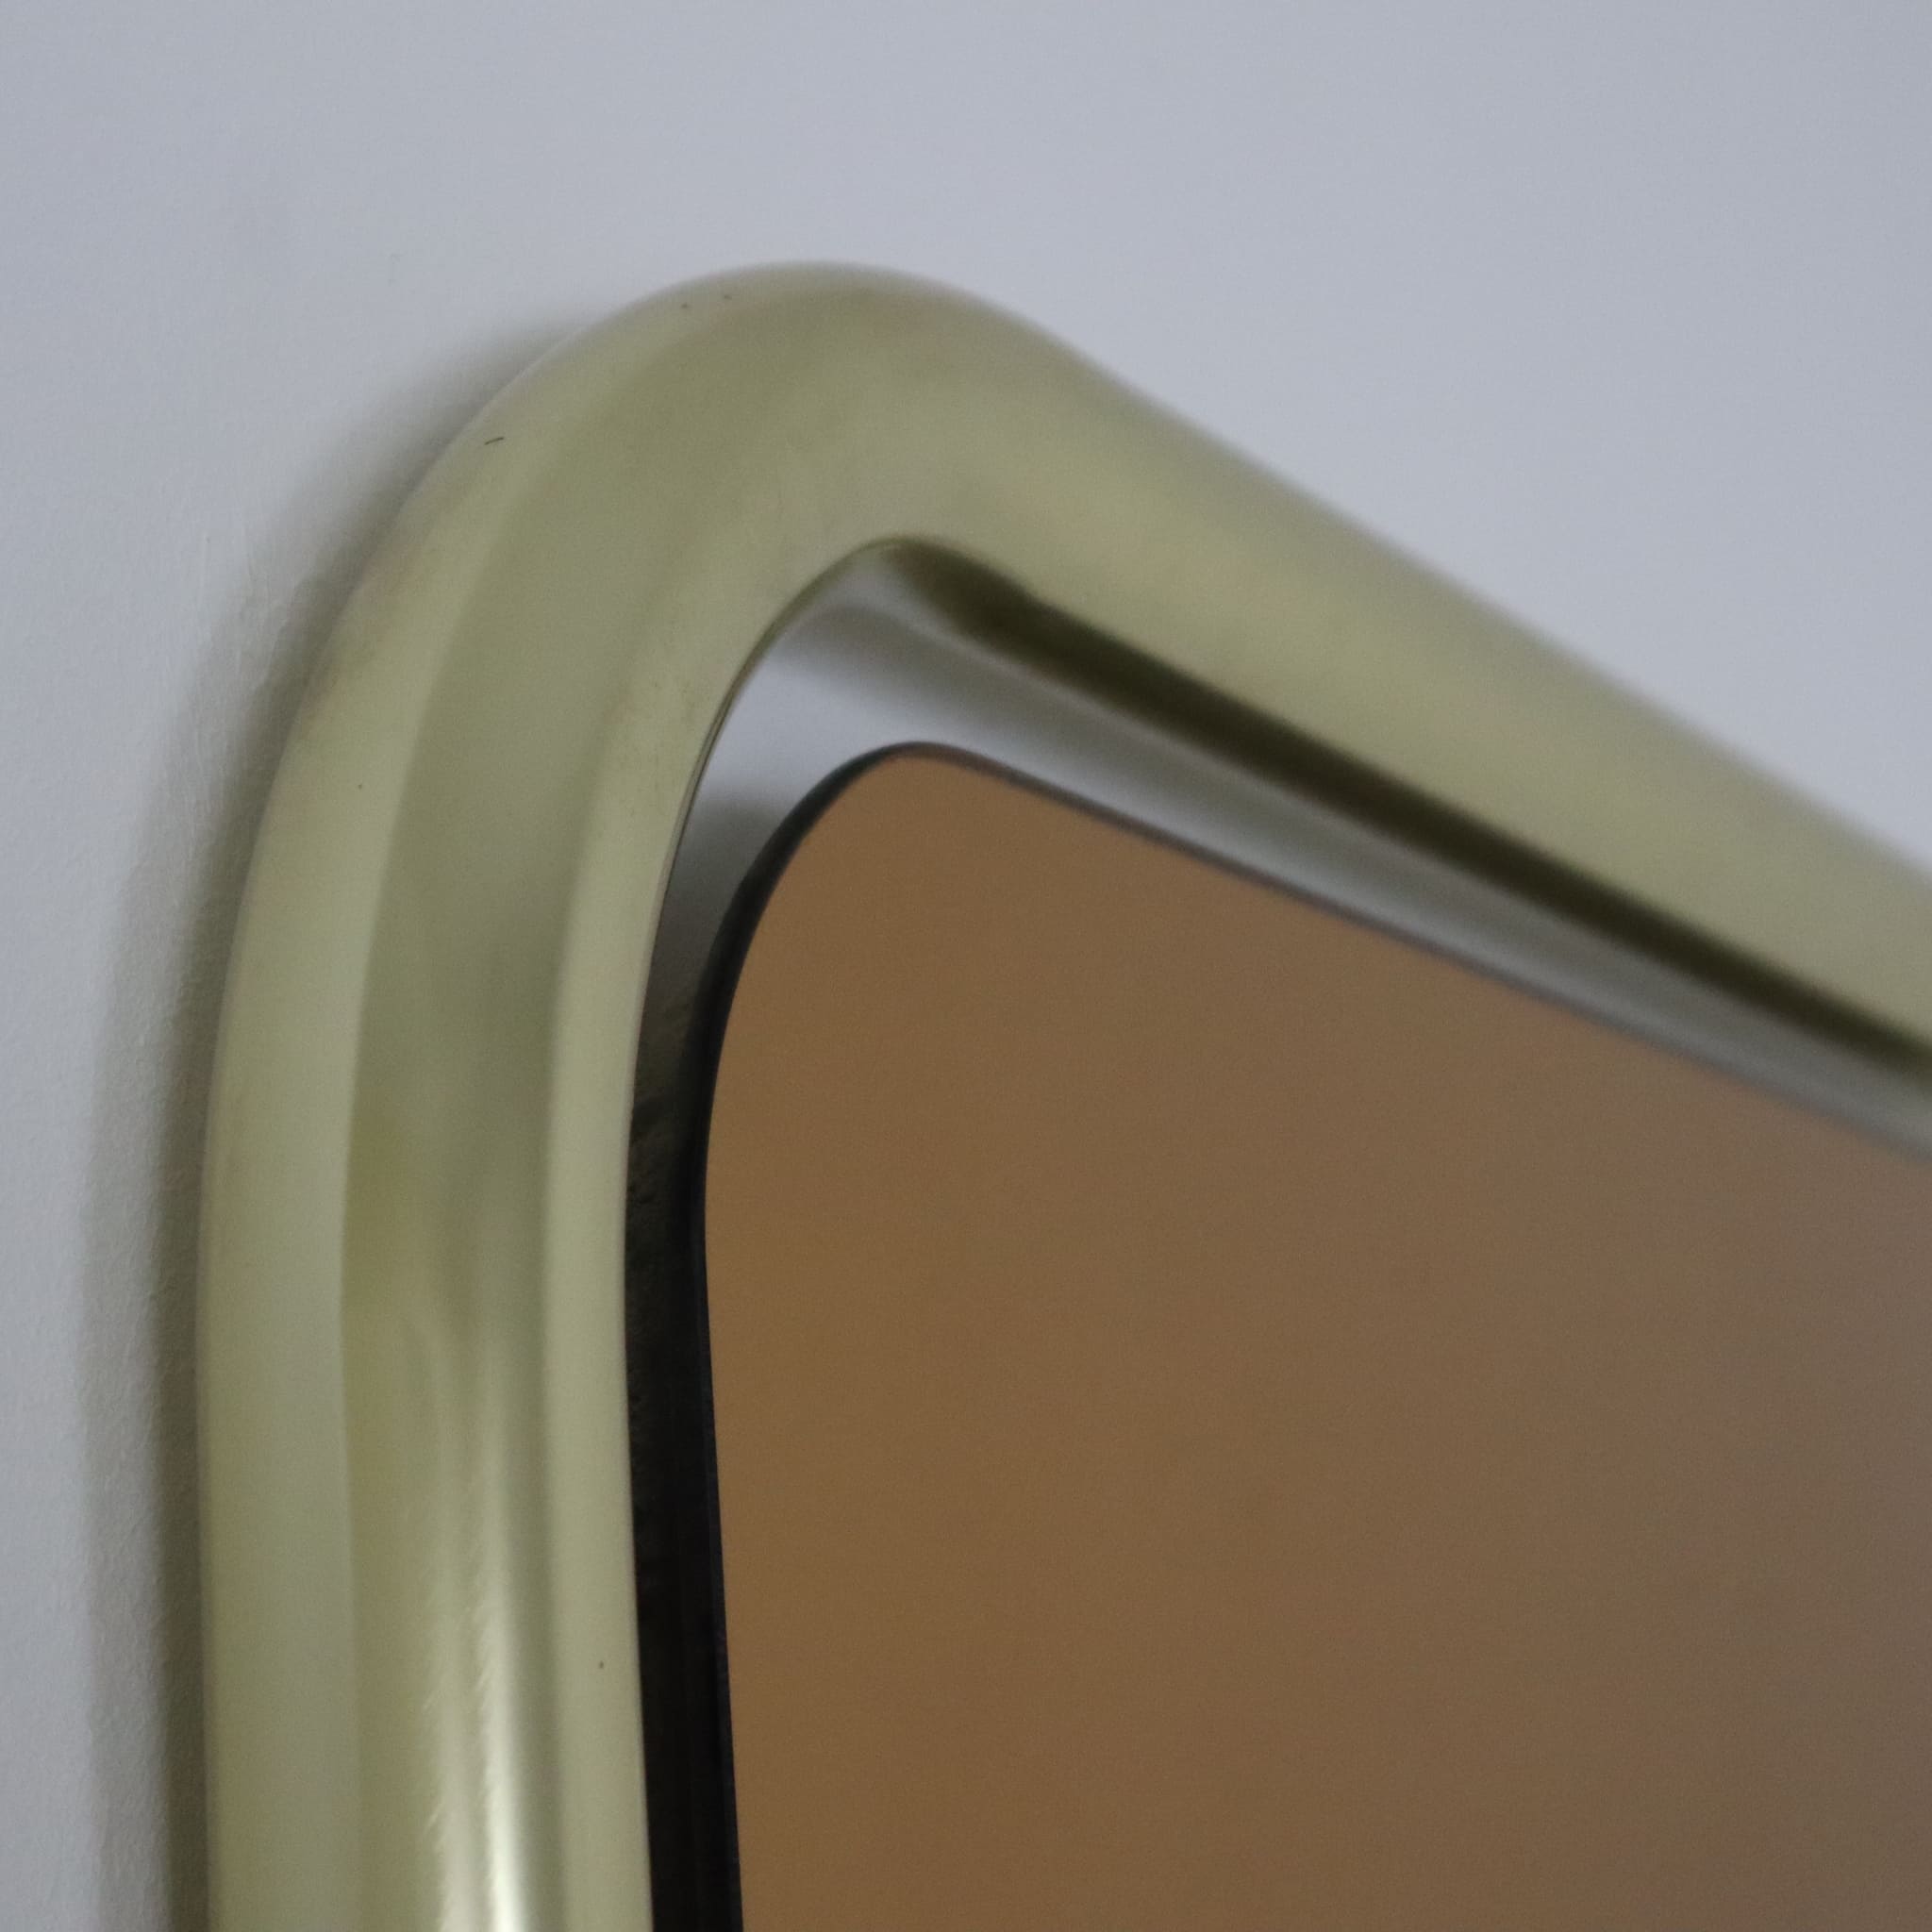 visionidepoca-modern-mirror-70s-frame-in-brassed-aluminium-and-bronzed-mirror-vintage-made-in-italy-detail-of-frame